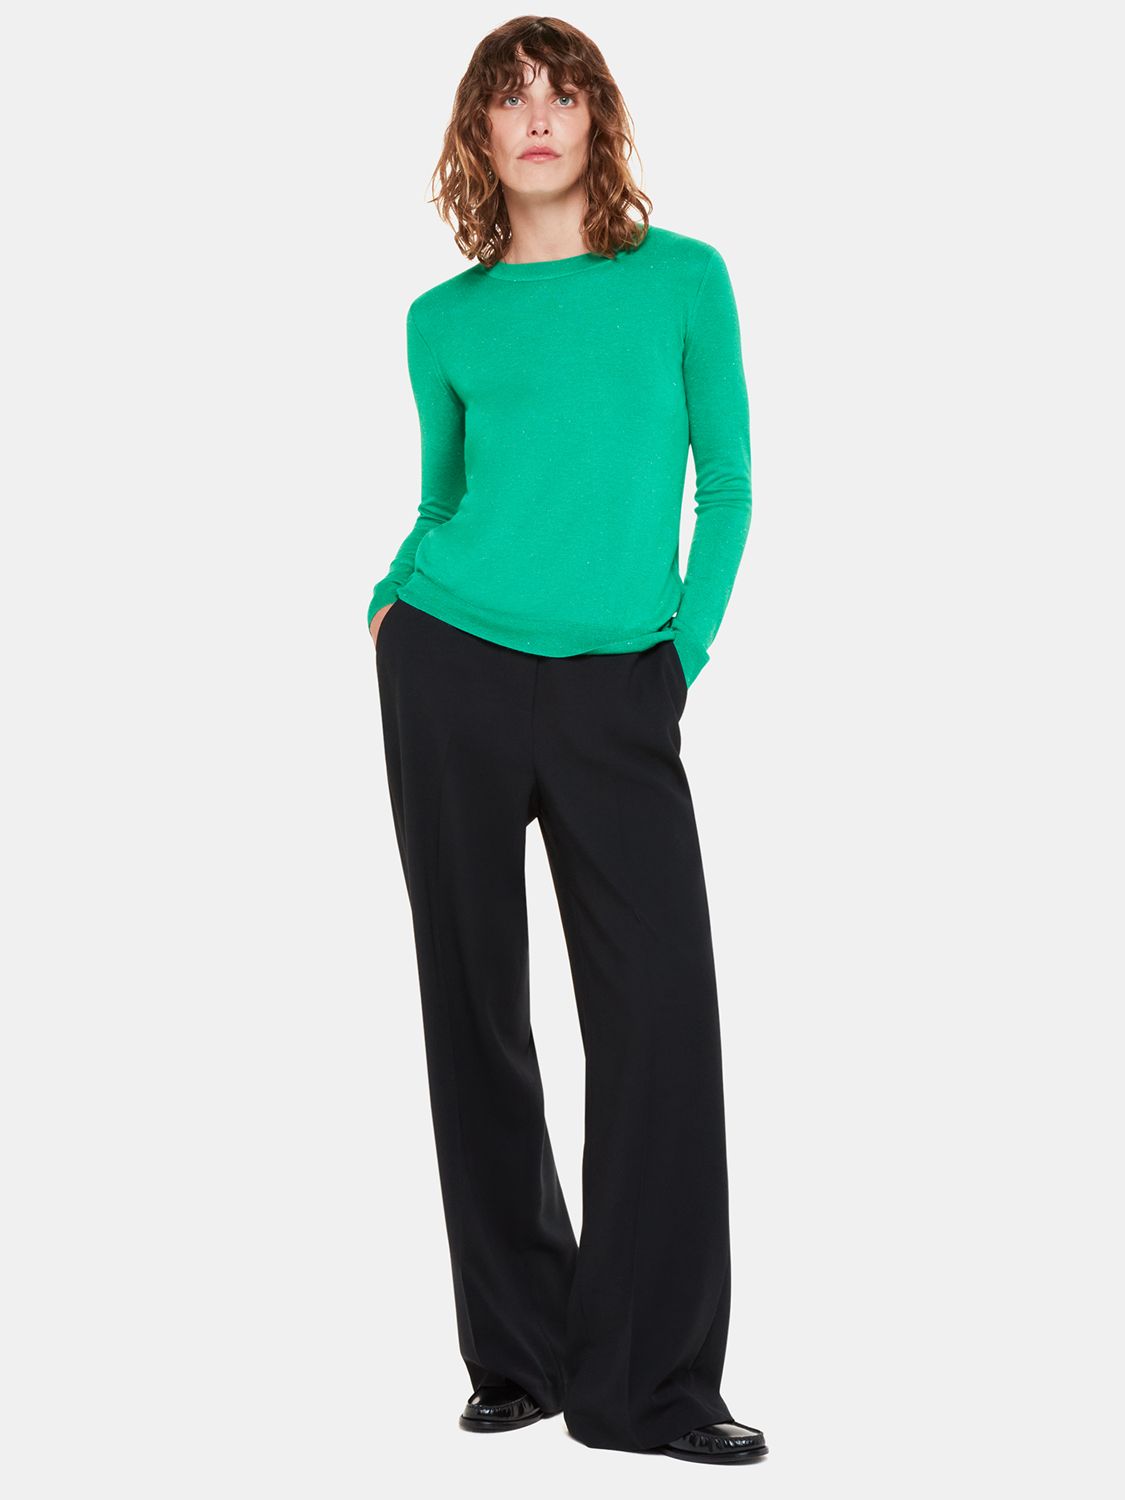 Whistles Annie Sparkle Fine Knit Jumper, Green at John Lewis & Partners